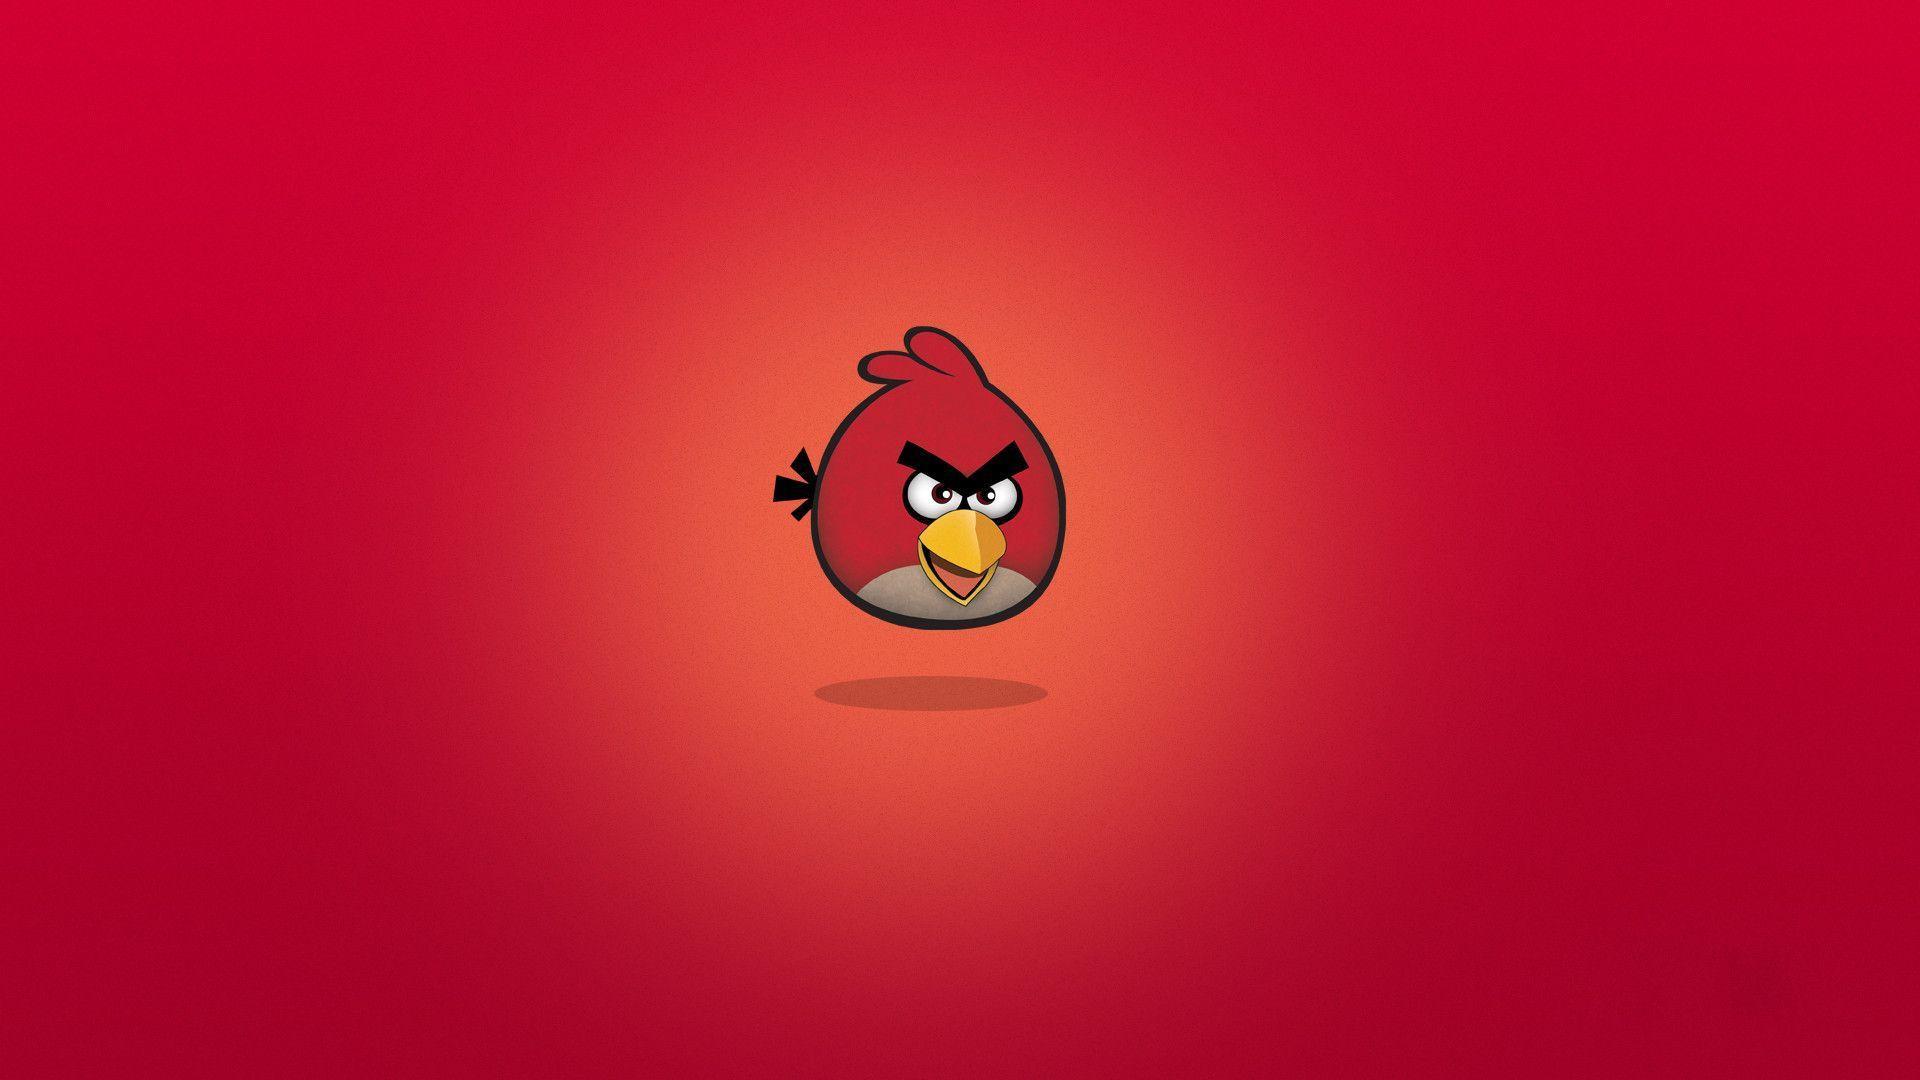 Angry Birds Wallpaper HD